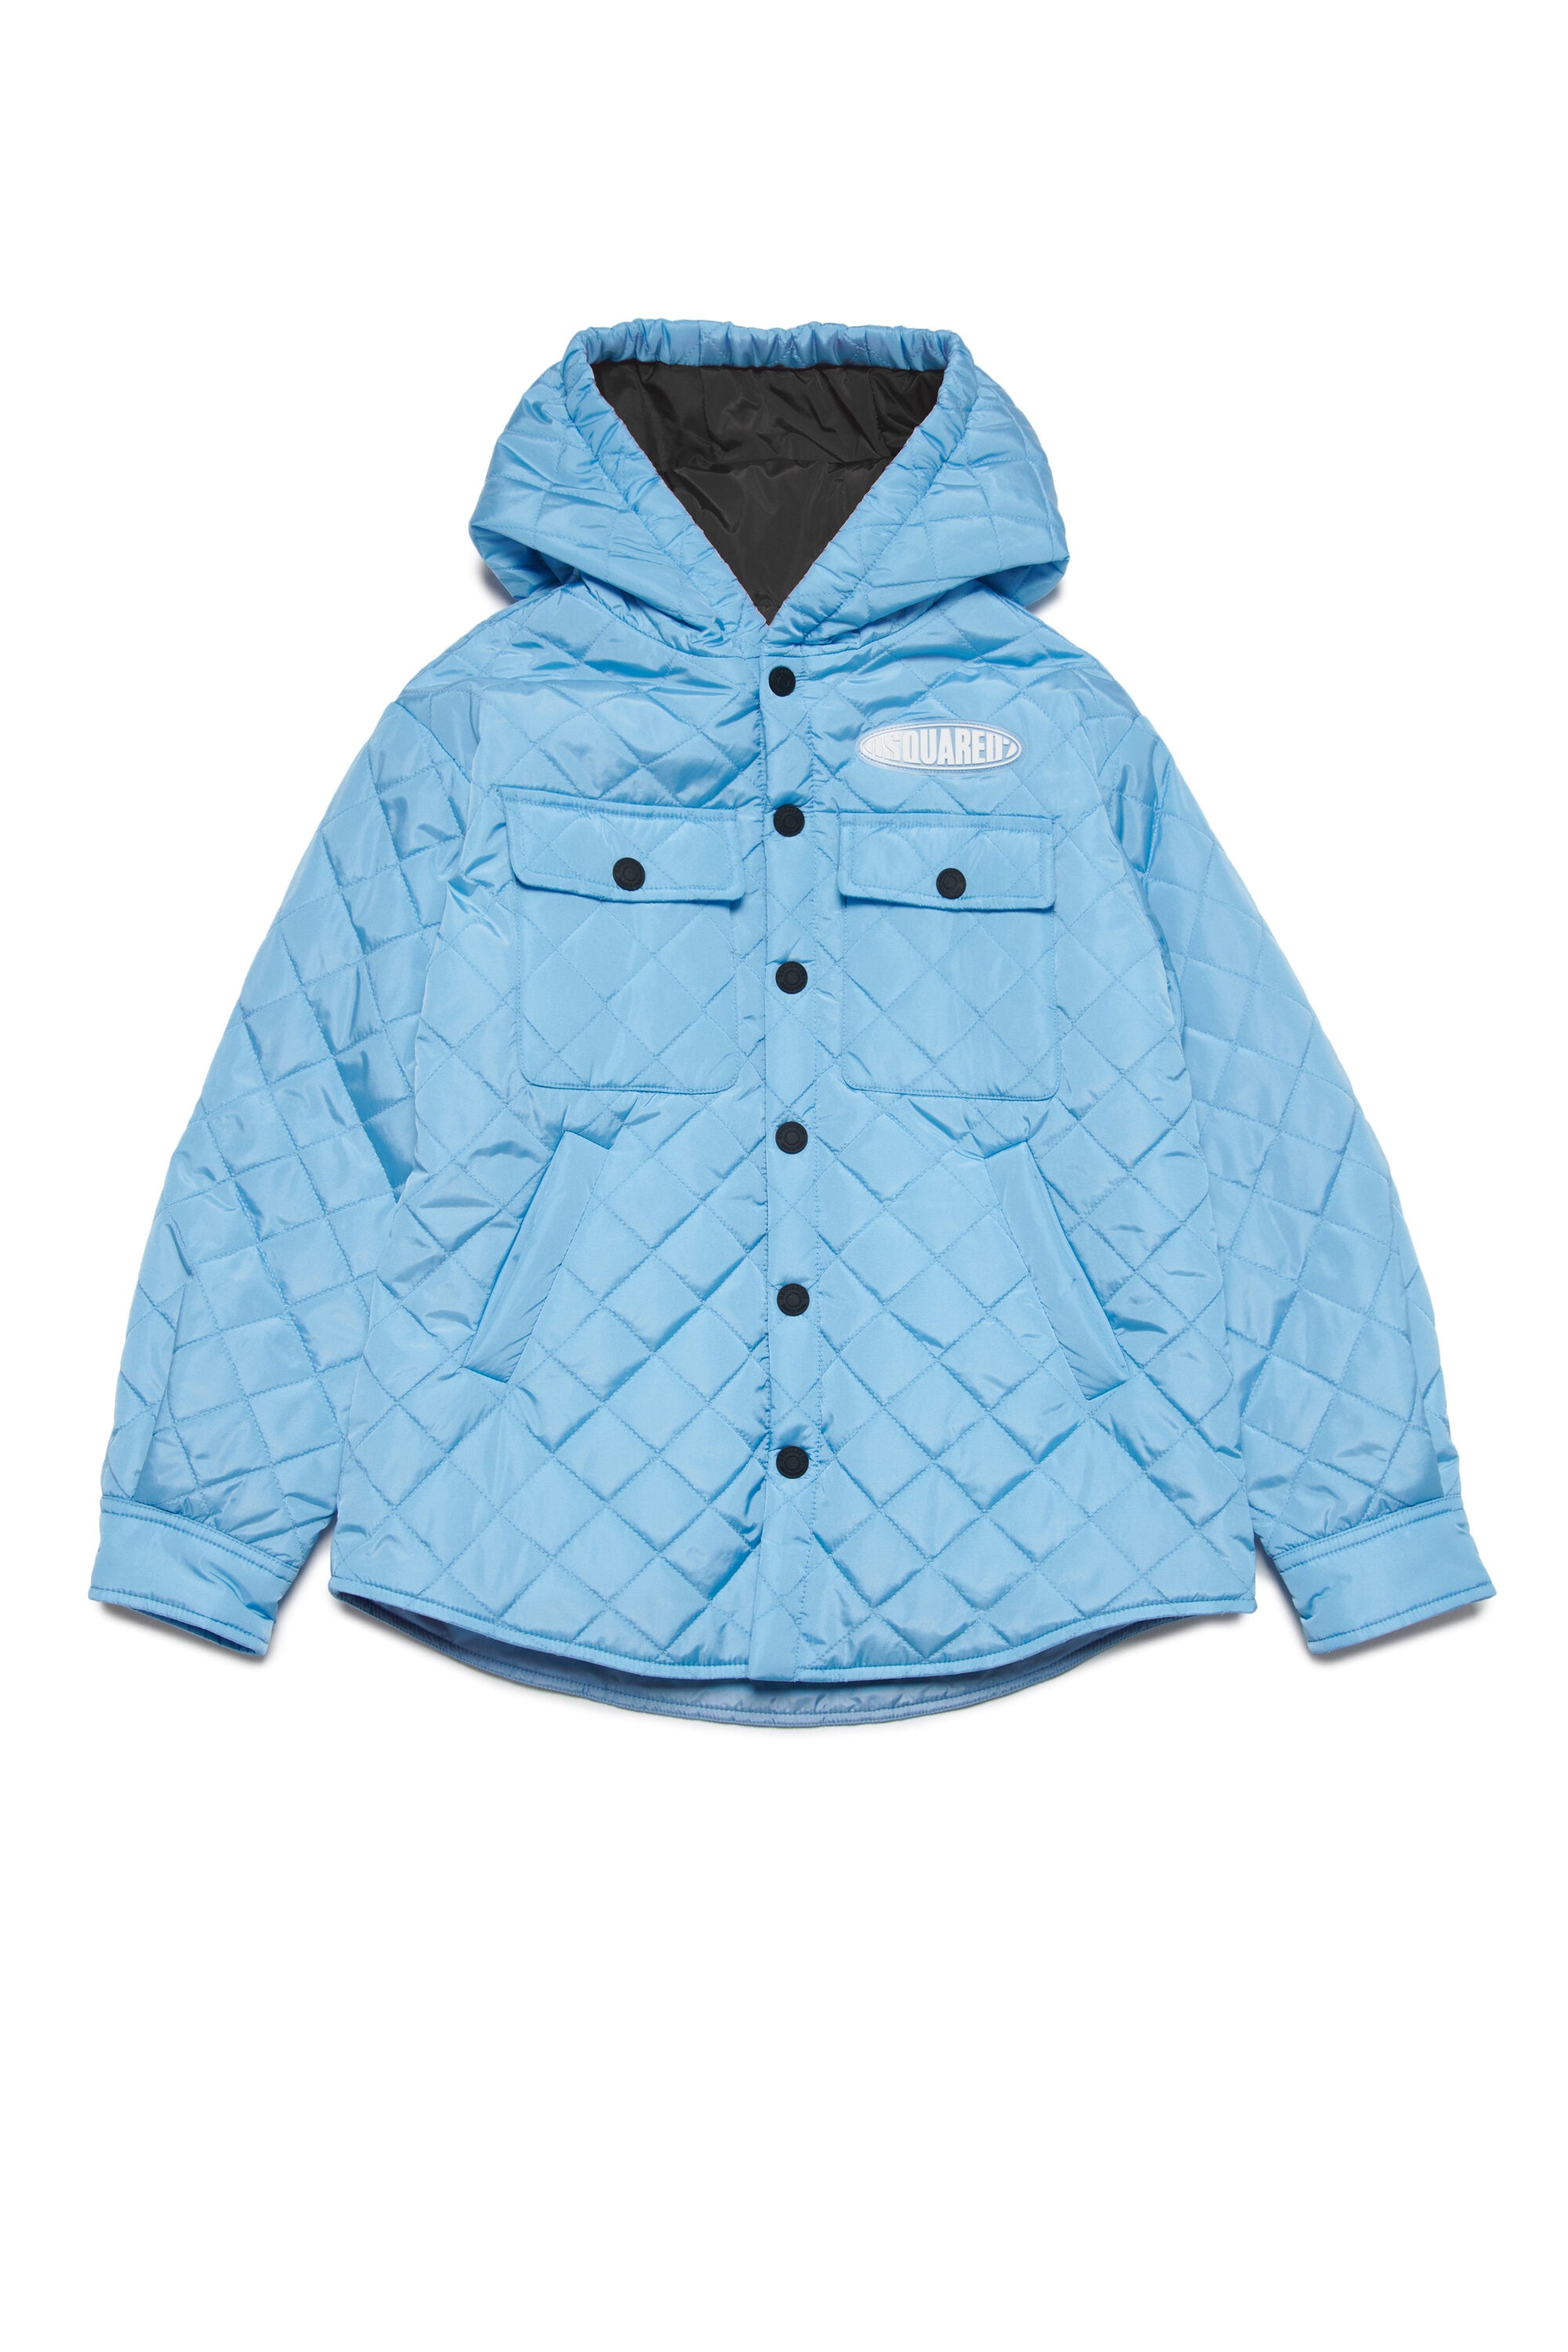 Lightweight padded jacket branded with surf logo patch